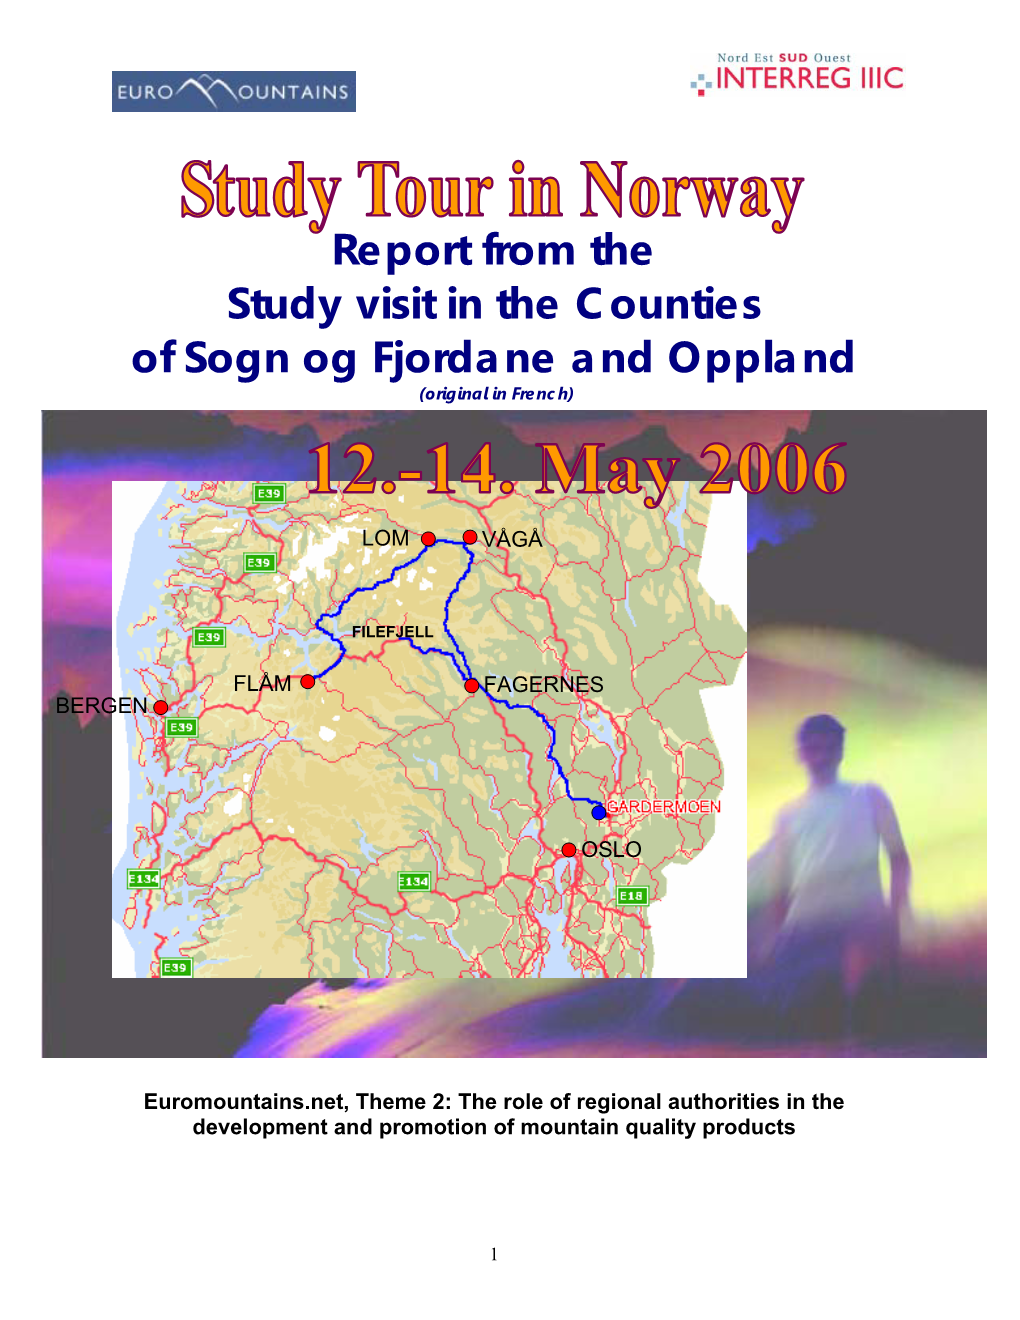 Report from the Study Visit in the Counties of Sogn Og Fjordane and Oppland (Original in French)